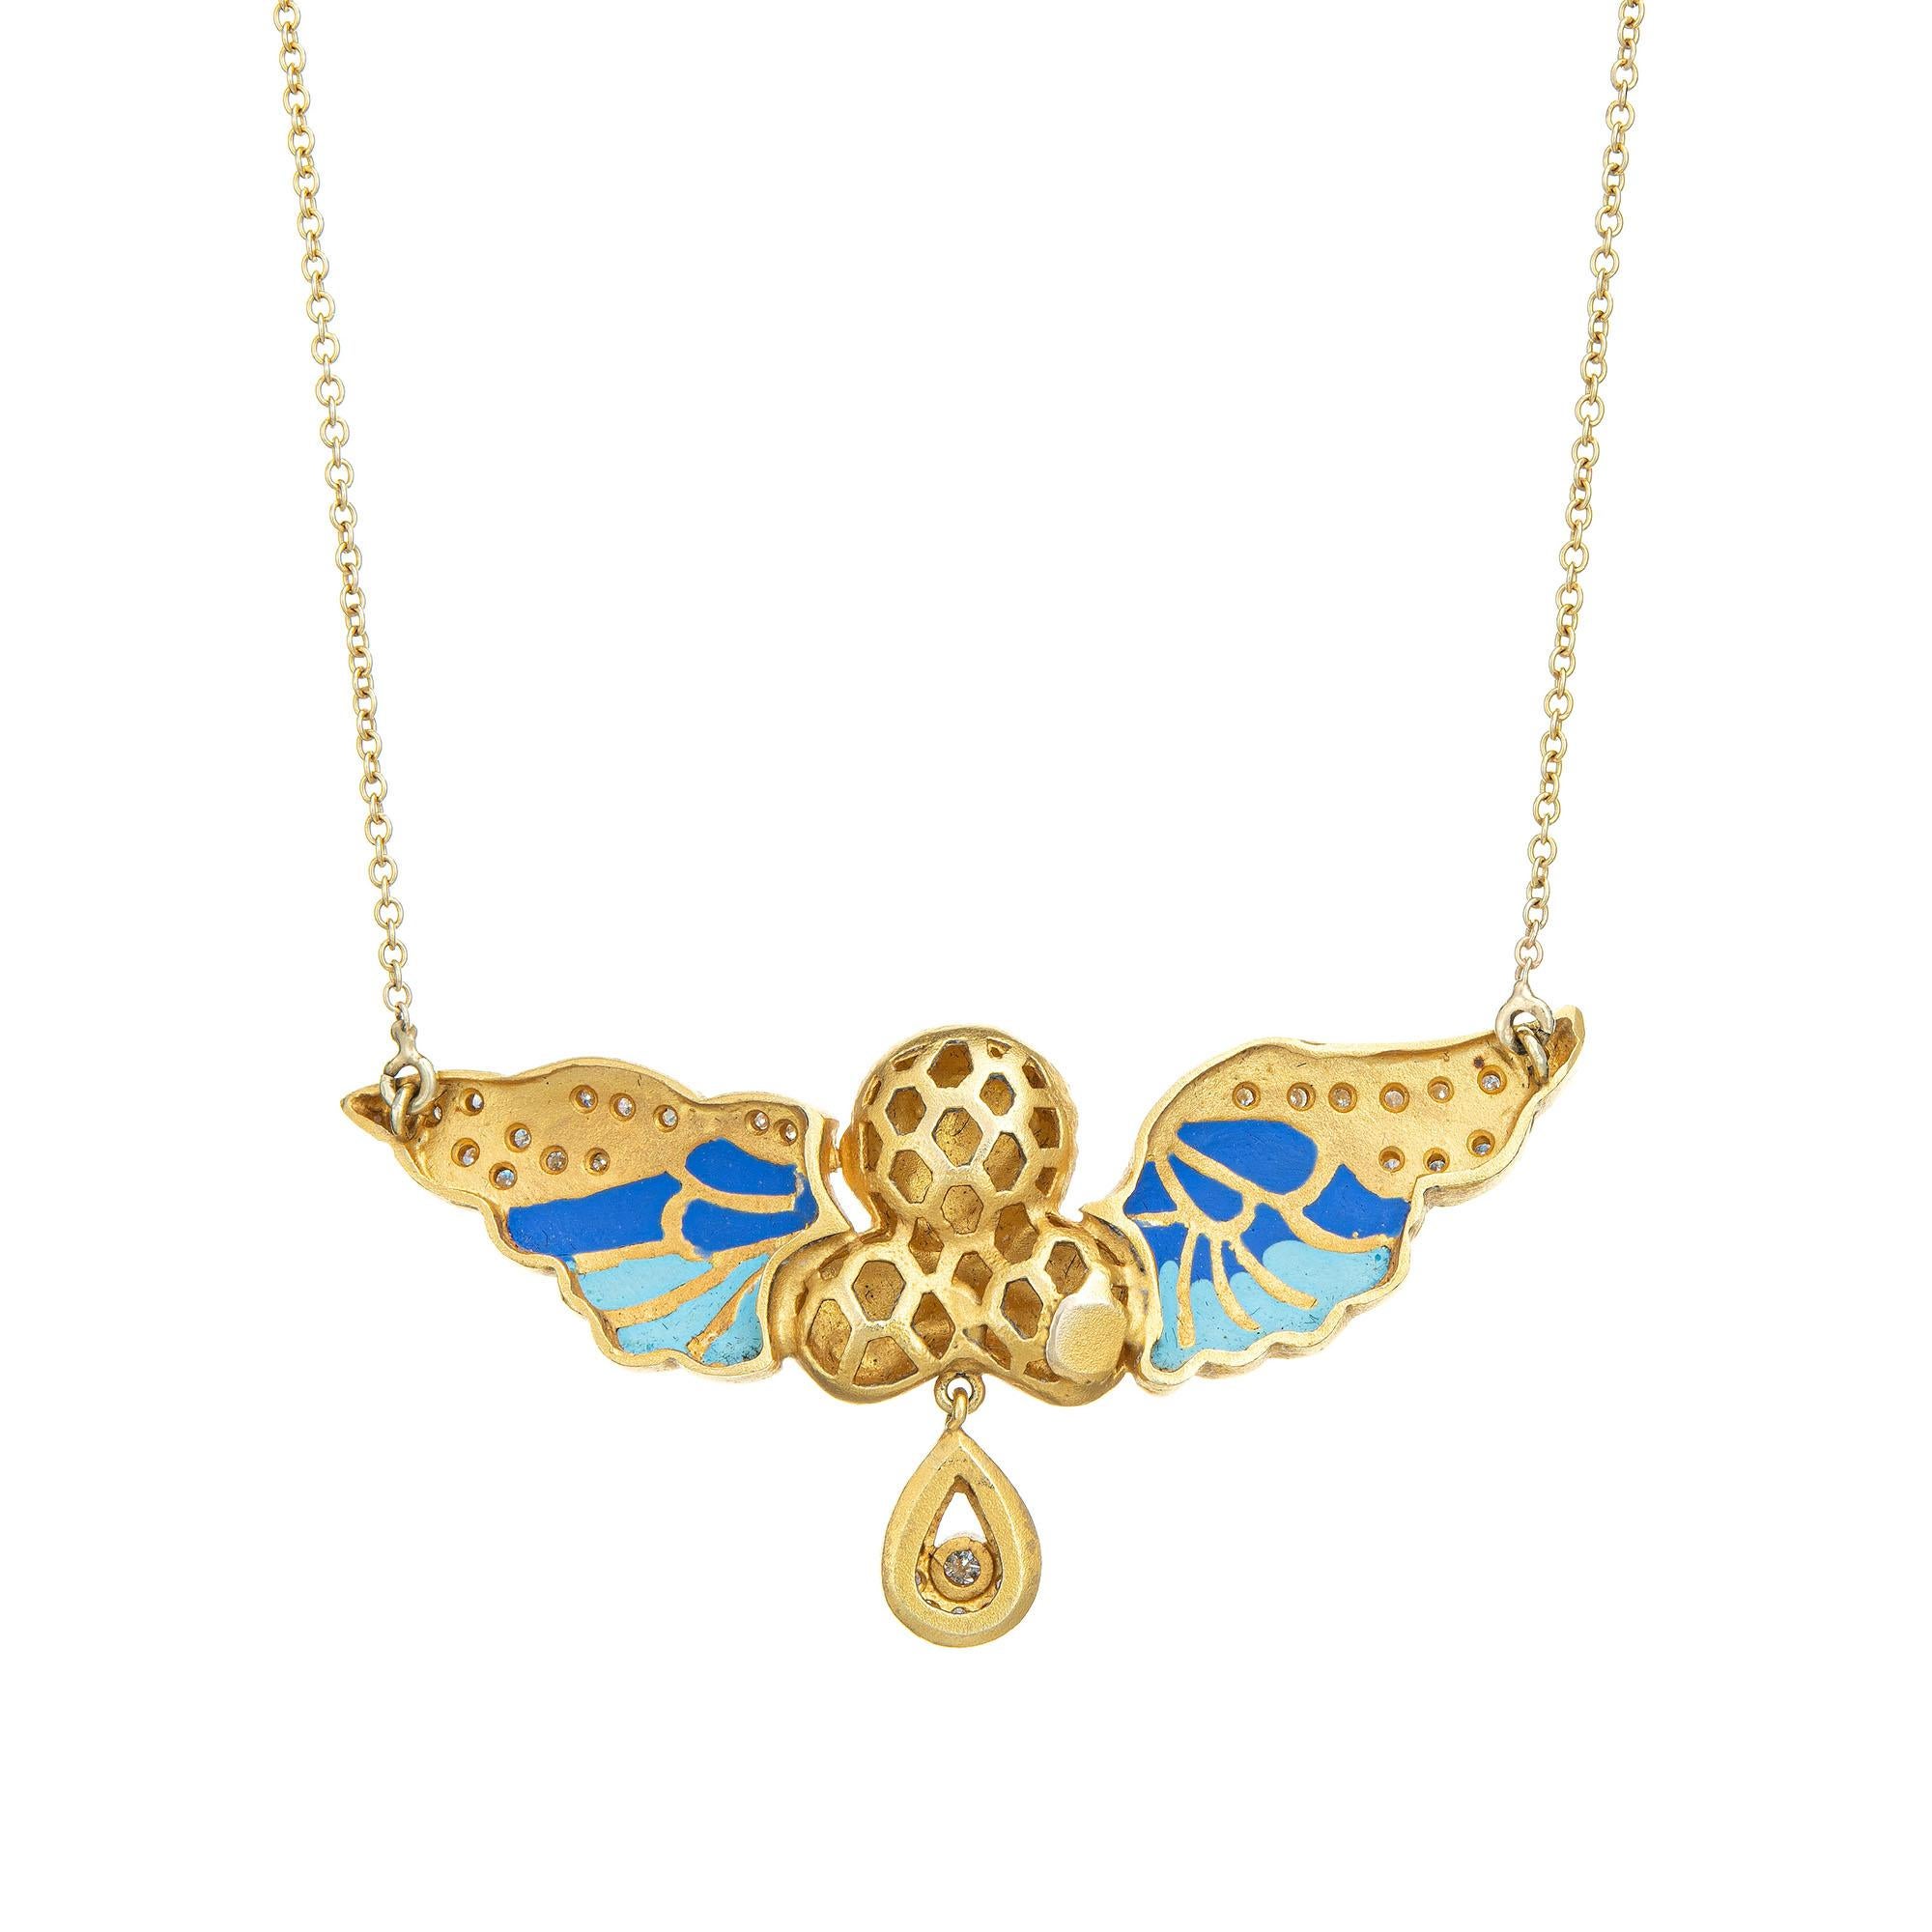 Stylish and finely detailed winged angel necklace crafted in 14k yellow gold.

Diamonds total an estimated 0.50 carats (estimated at H-I color and SI1-2 clarity).
The charming necklace features blue and turquoise enamel set into the wings, with the